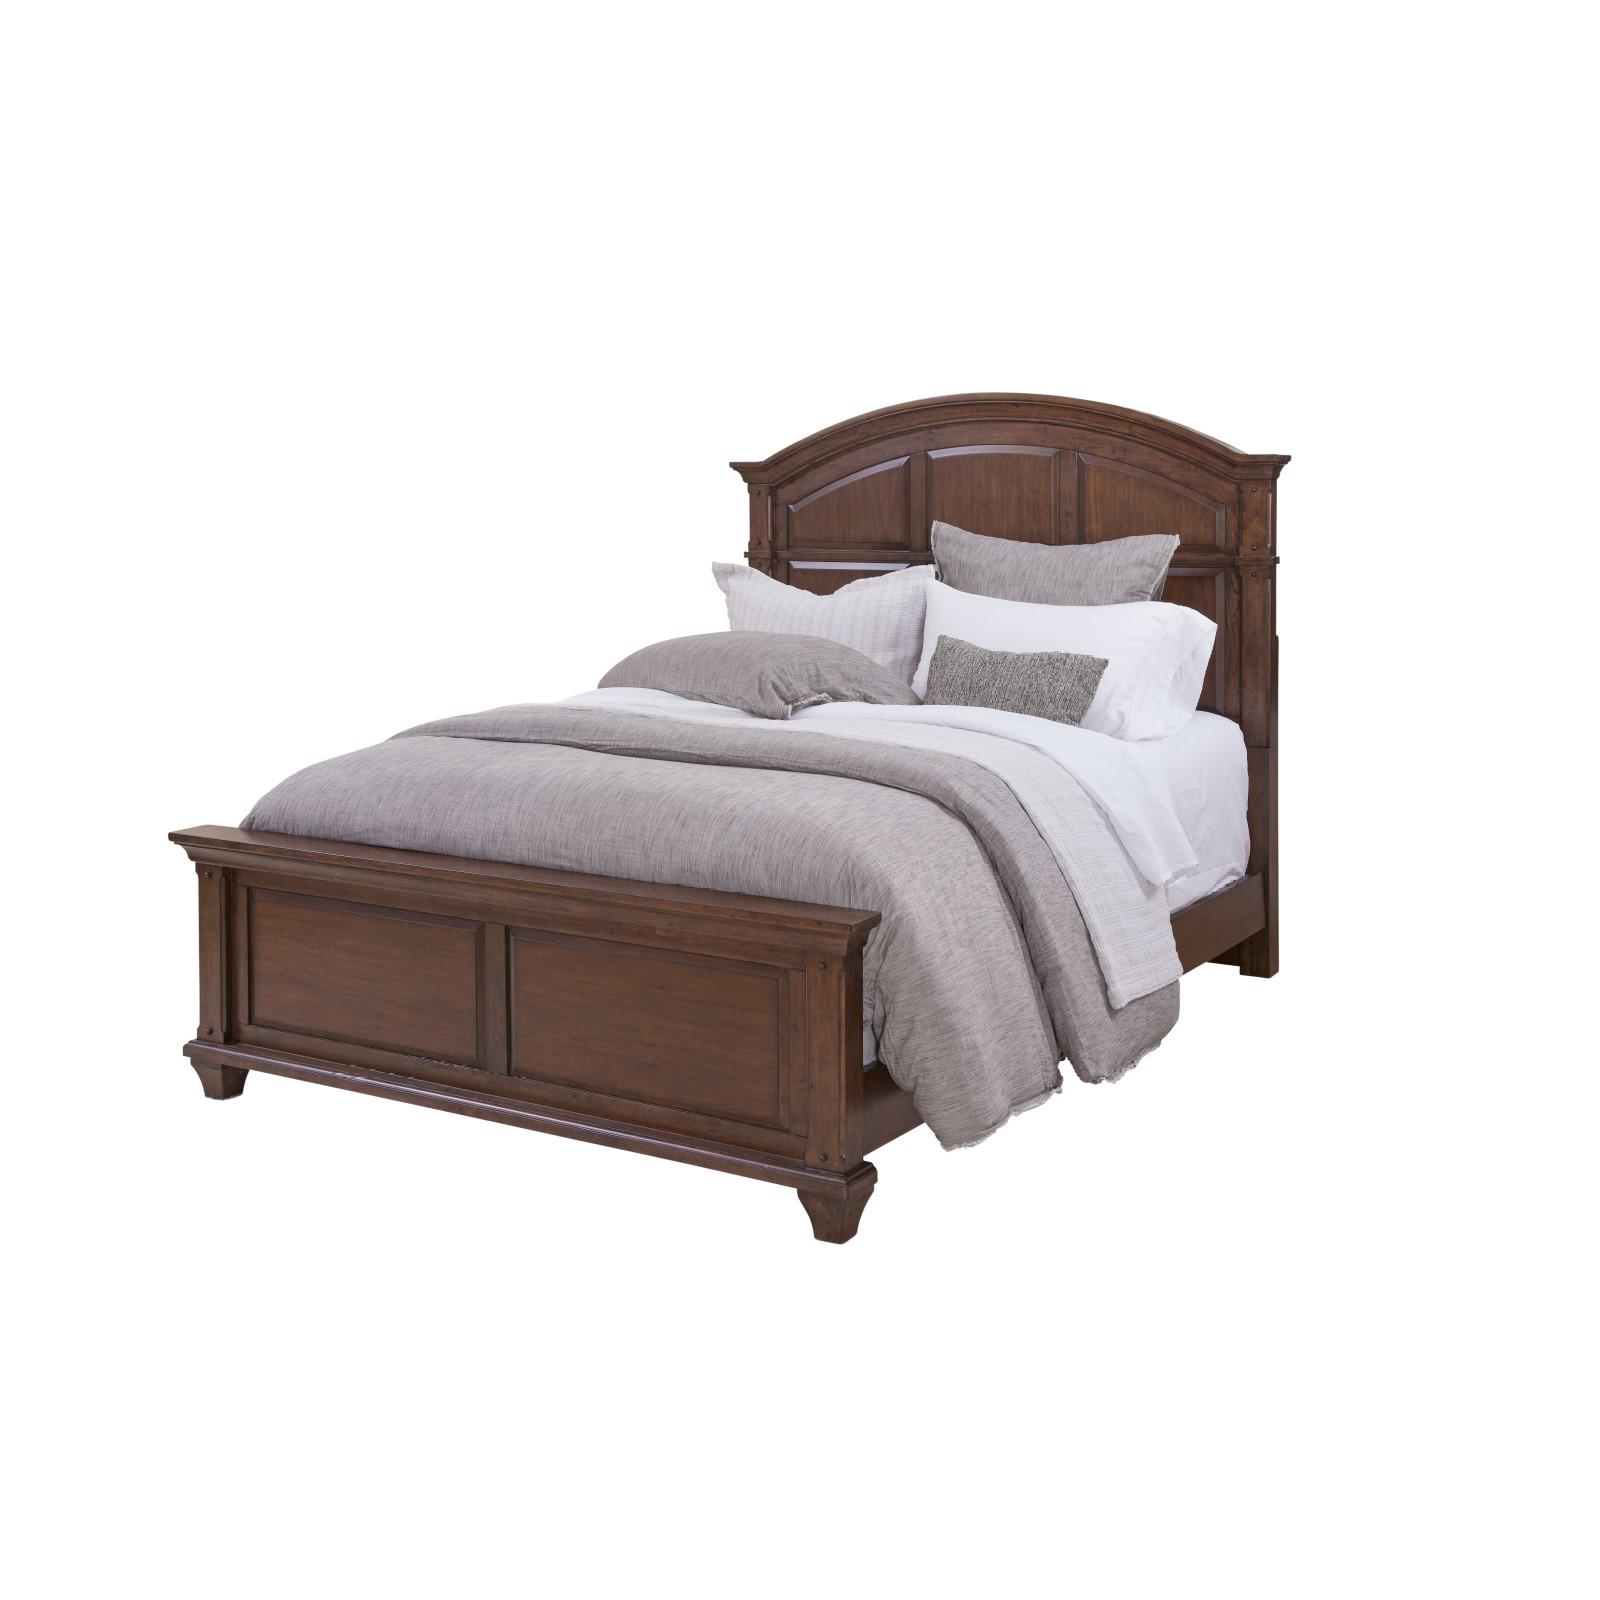 Classic, Traditional Panel Bed SEDONA 2400-66PAN 2400-66PAN in Cherry 